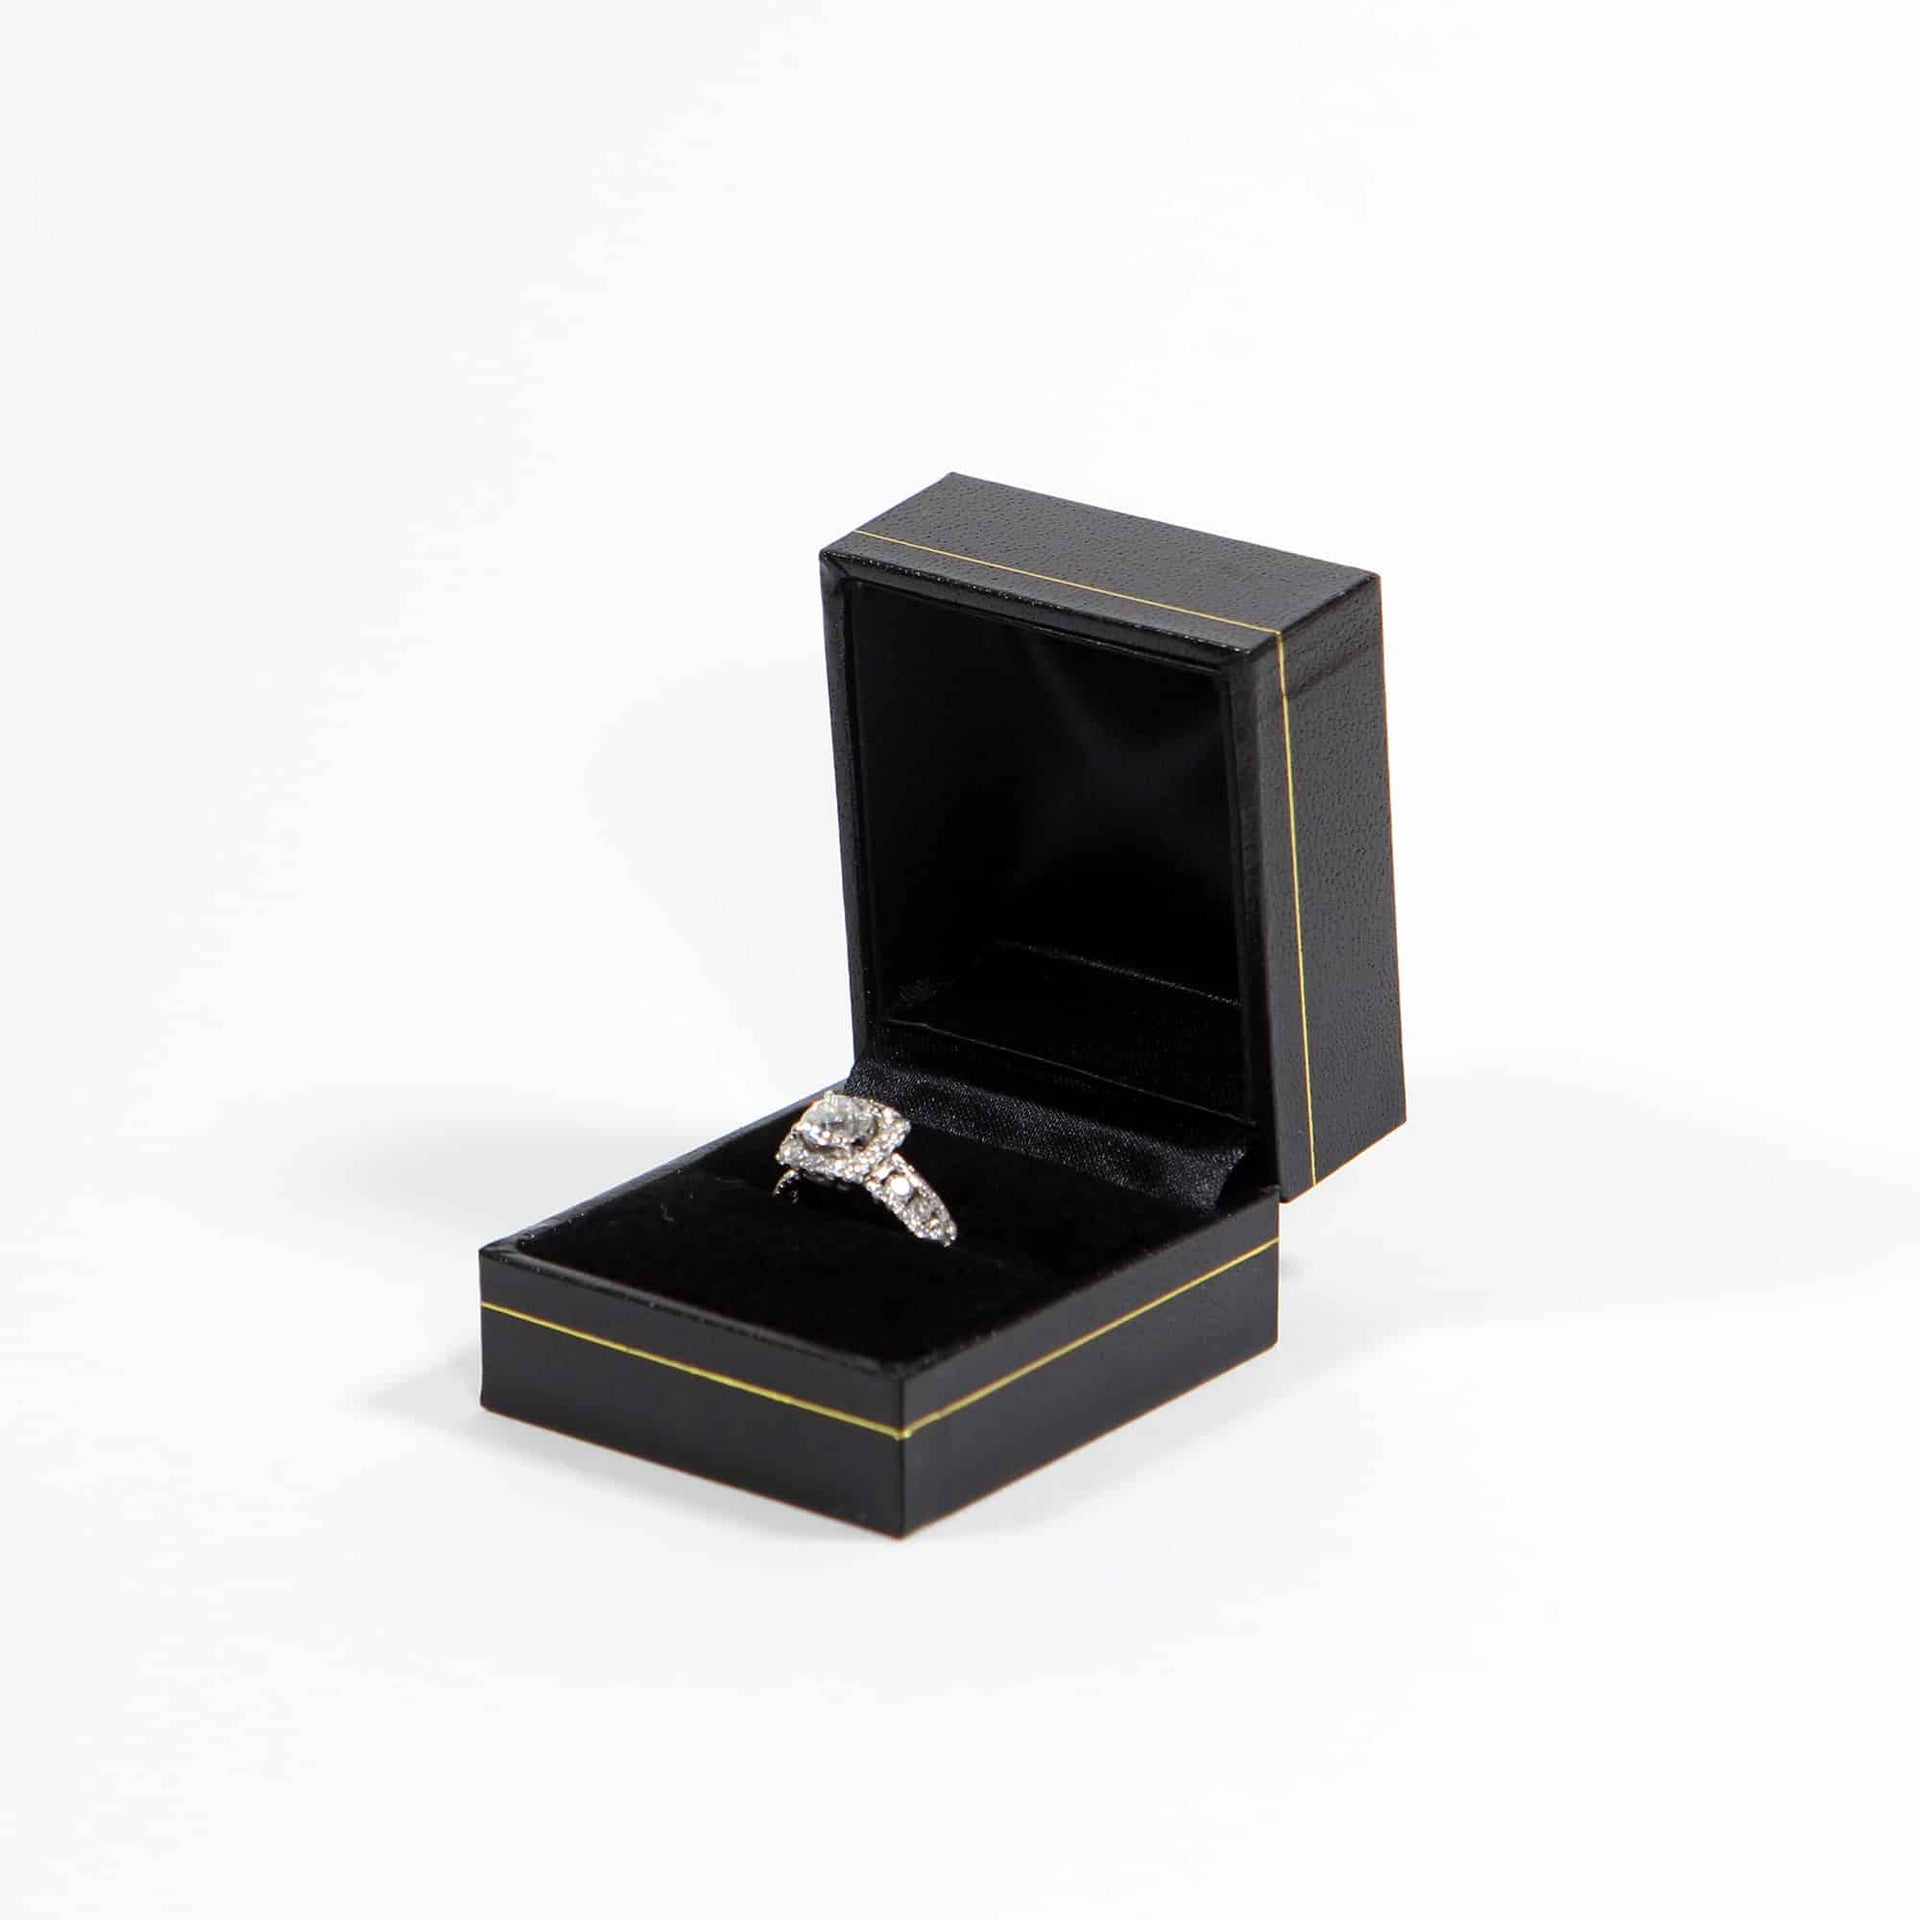 Single ring box for men or women. This classic black style is timeless for any weddings or engagements.